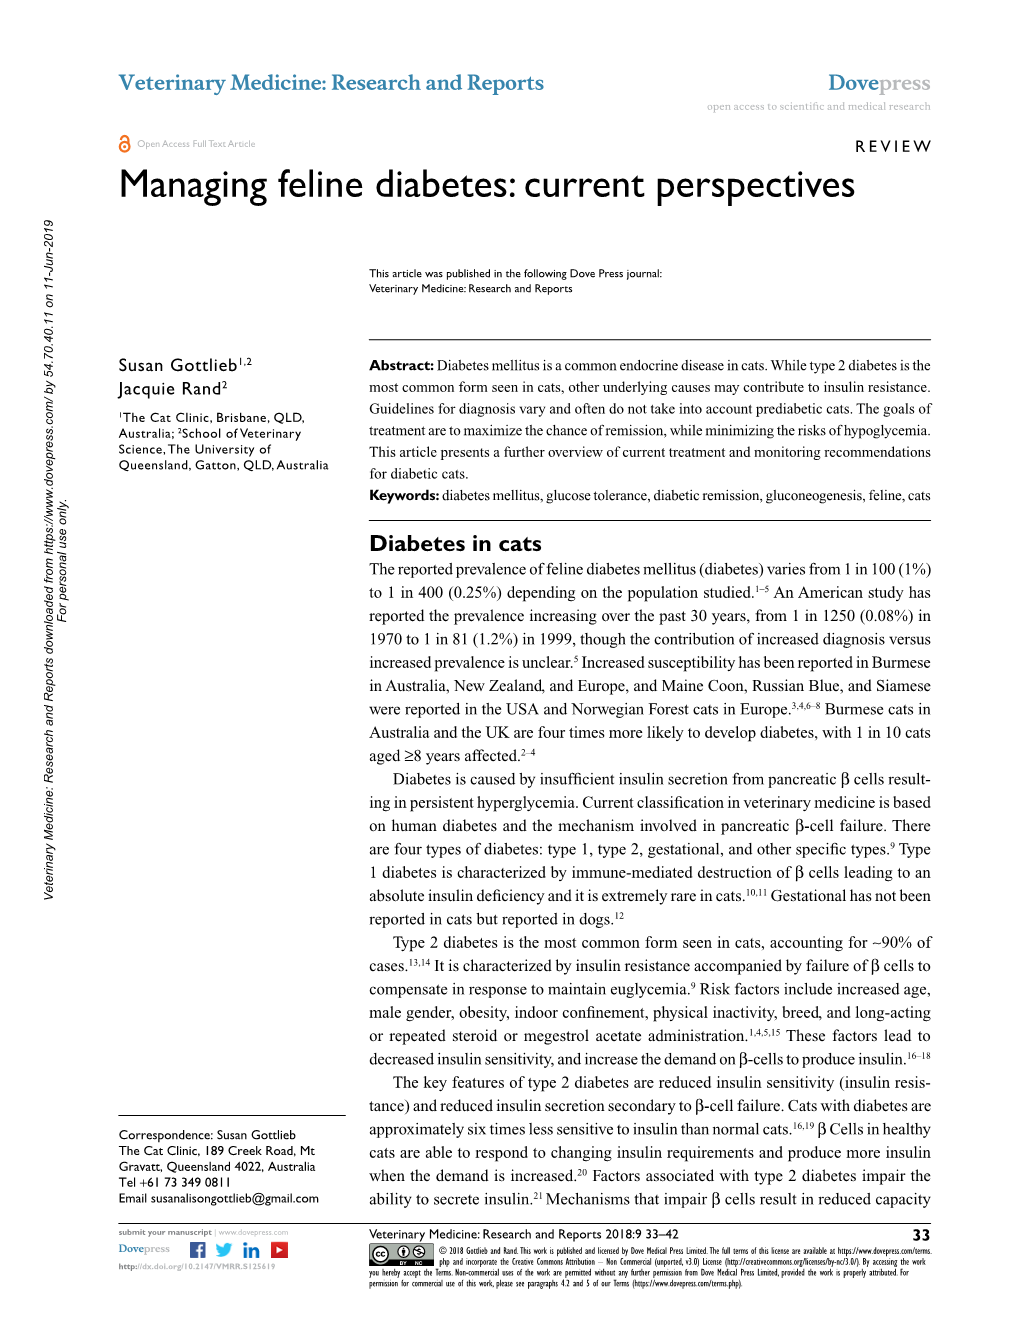 Managing Feline Diabetes Open Access to Scientific and Medical Research DOI